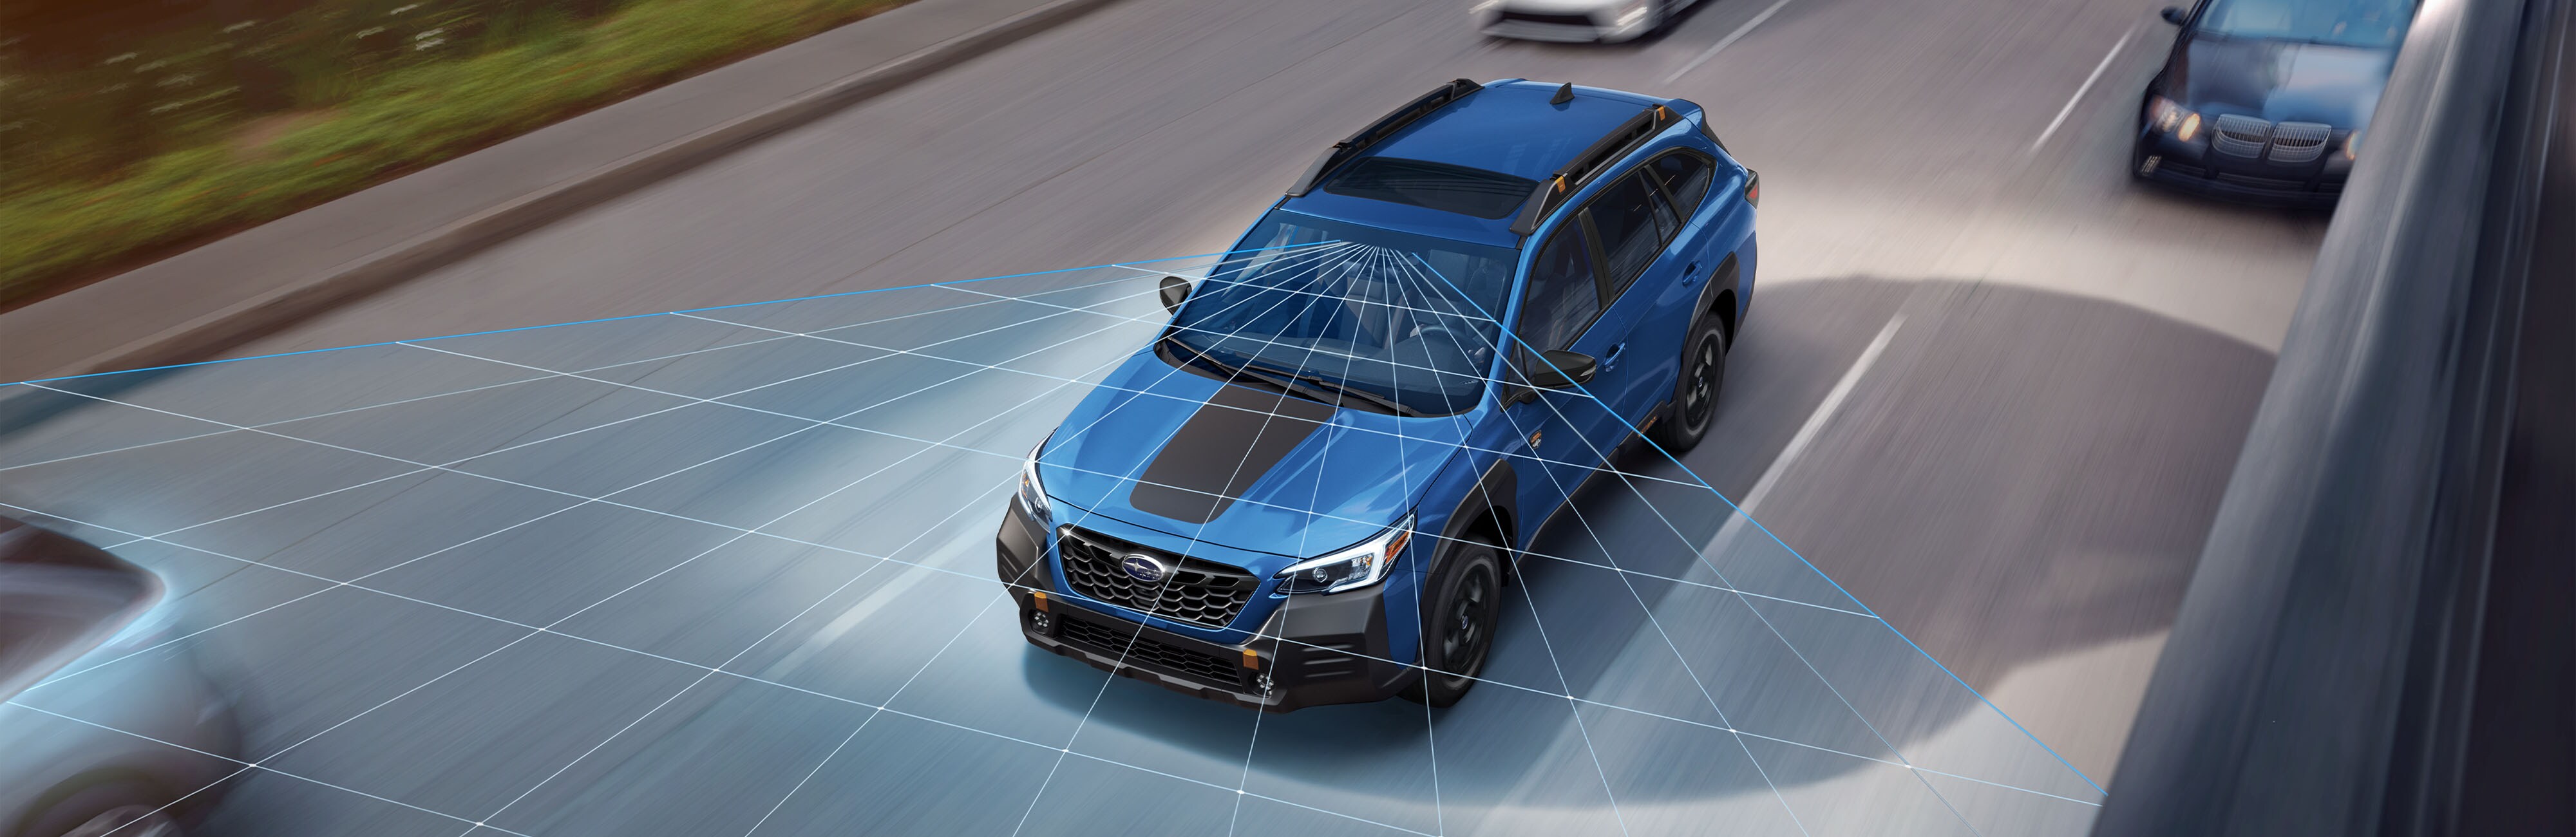  A photo illustration of the EyeSight Driver Assist Technology on the 2023 Outback Wilderness.